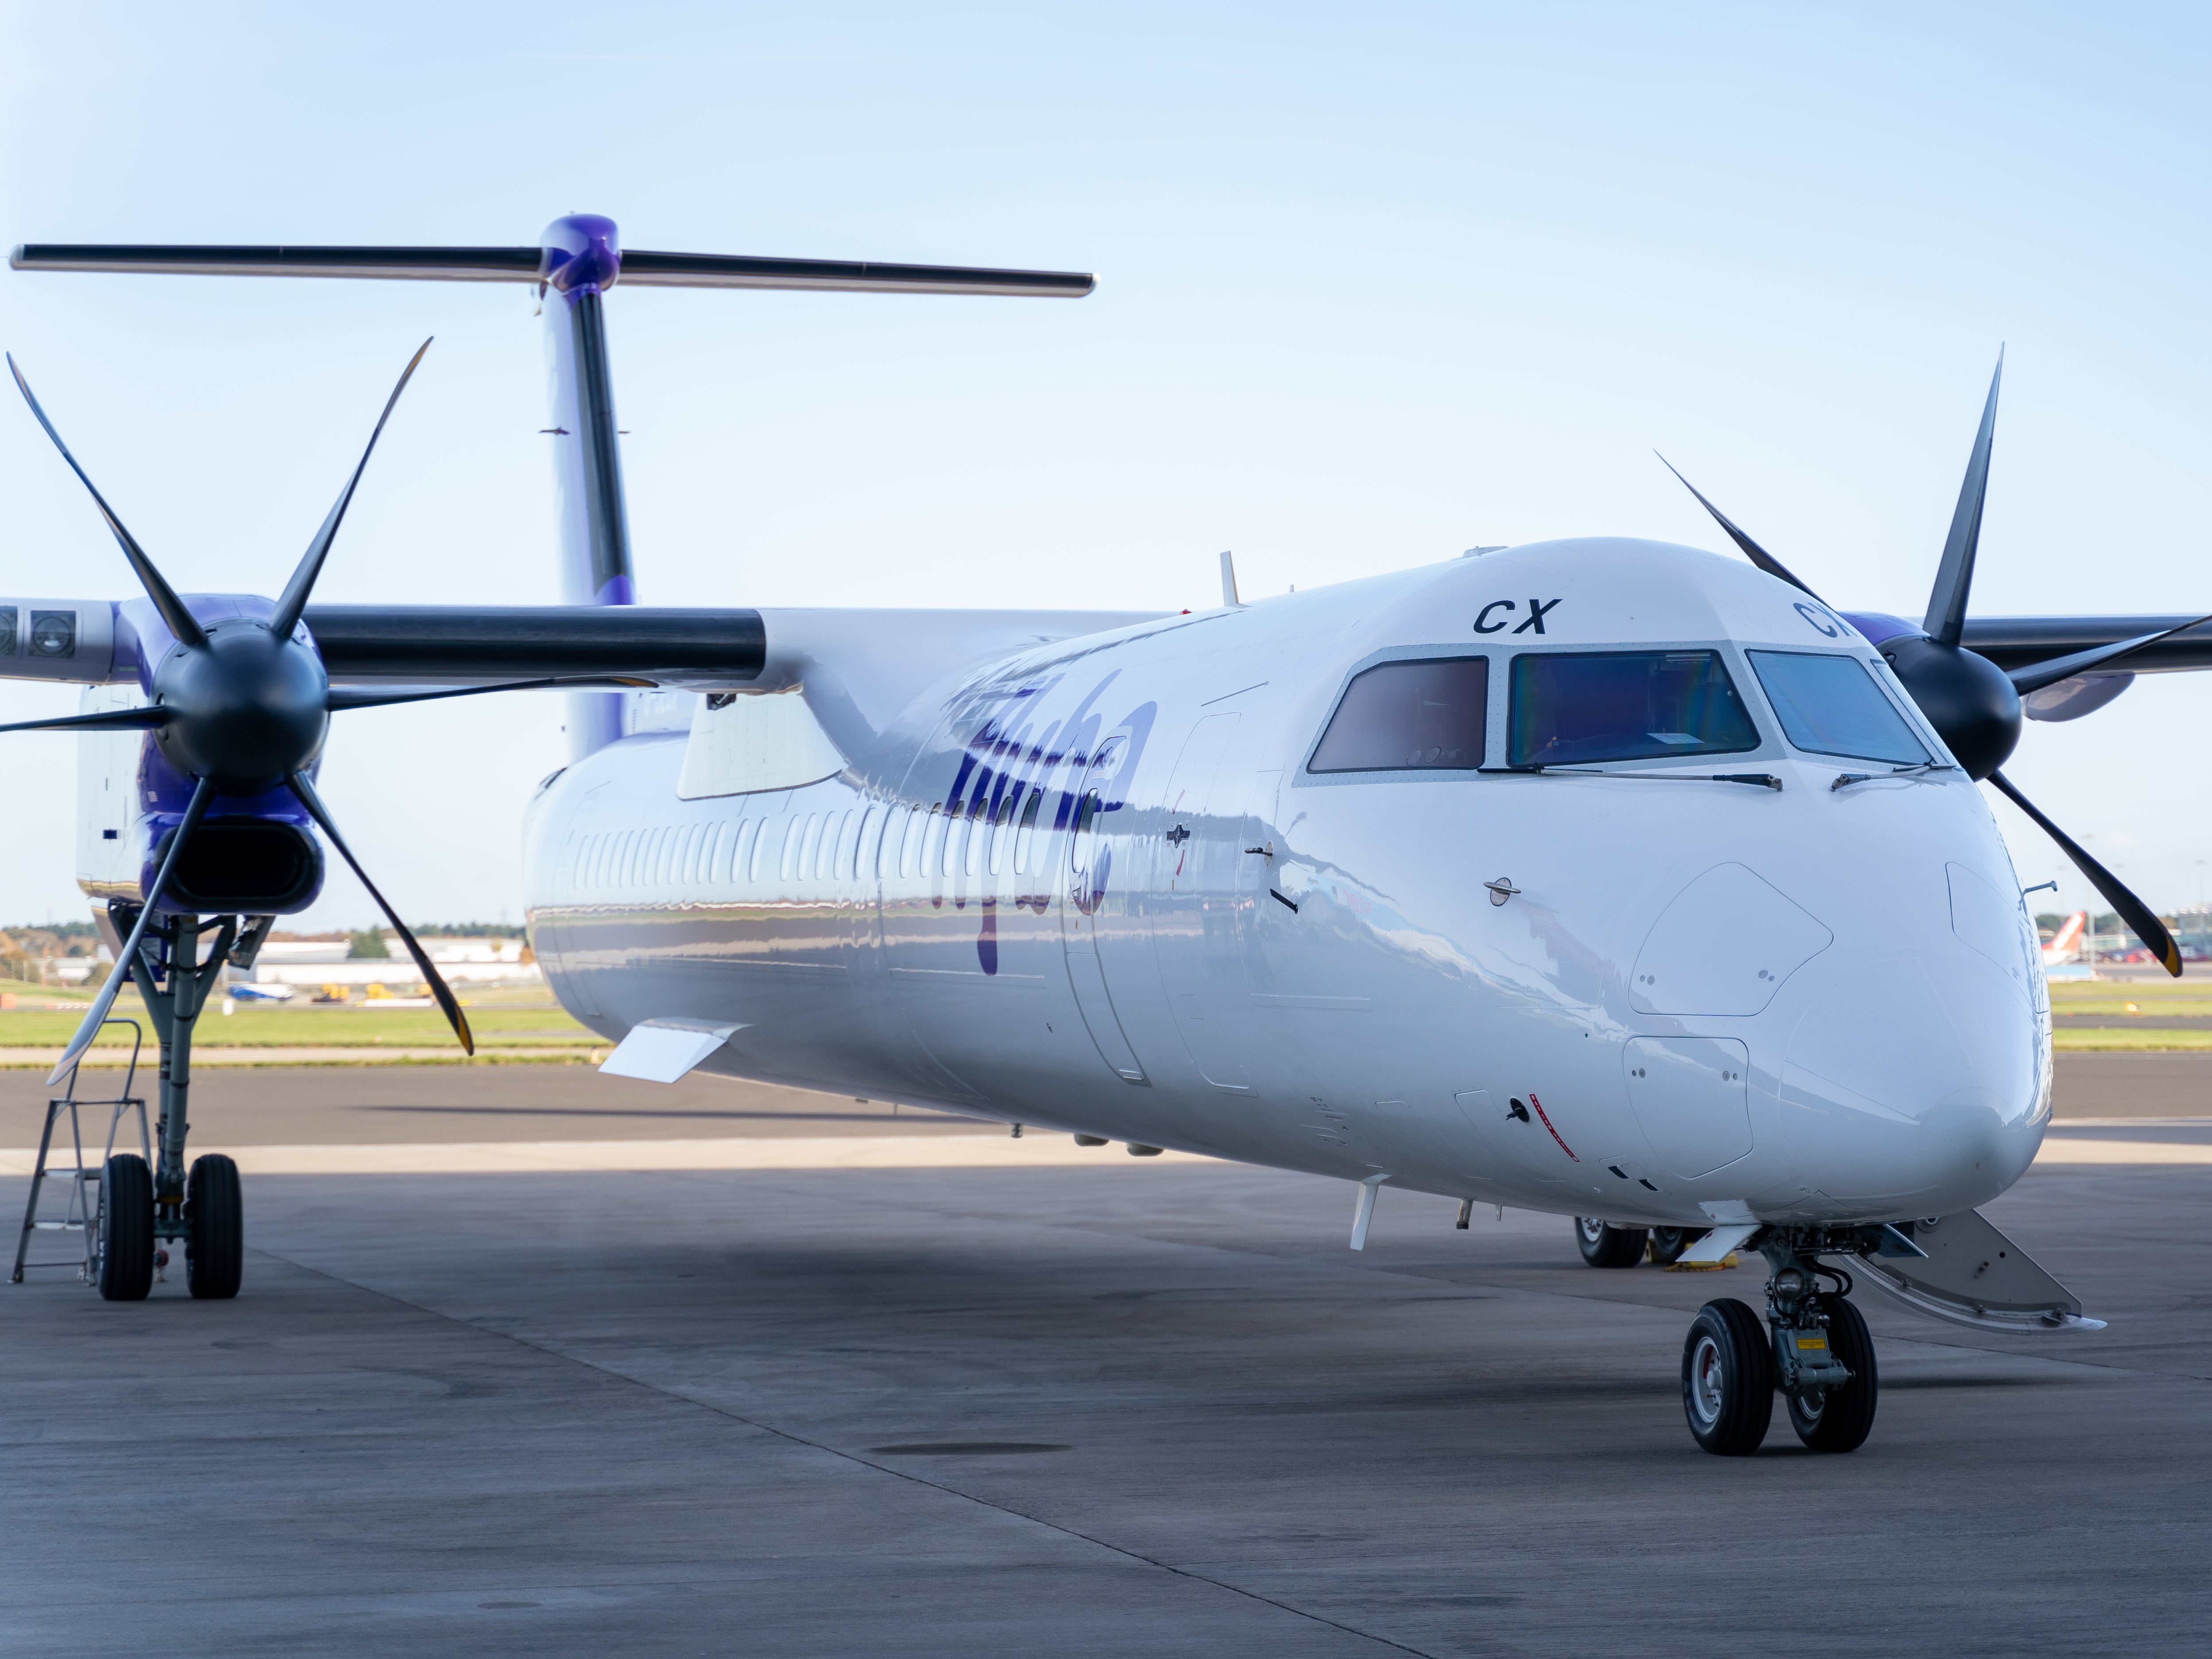 Ready to go? A Q400 aircraft in the new colours of Flybe